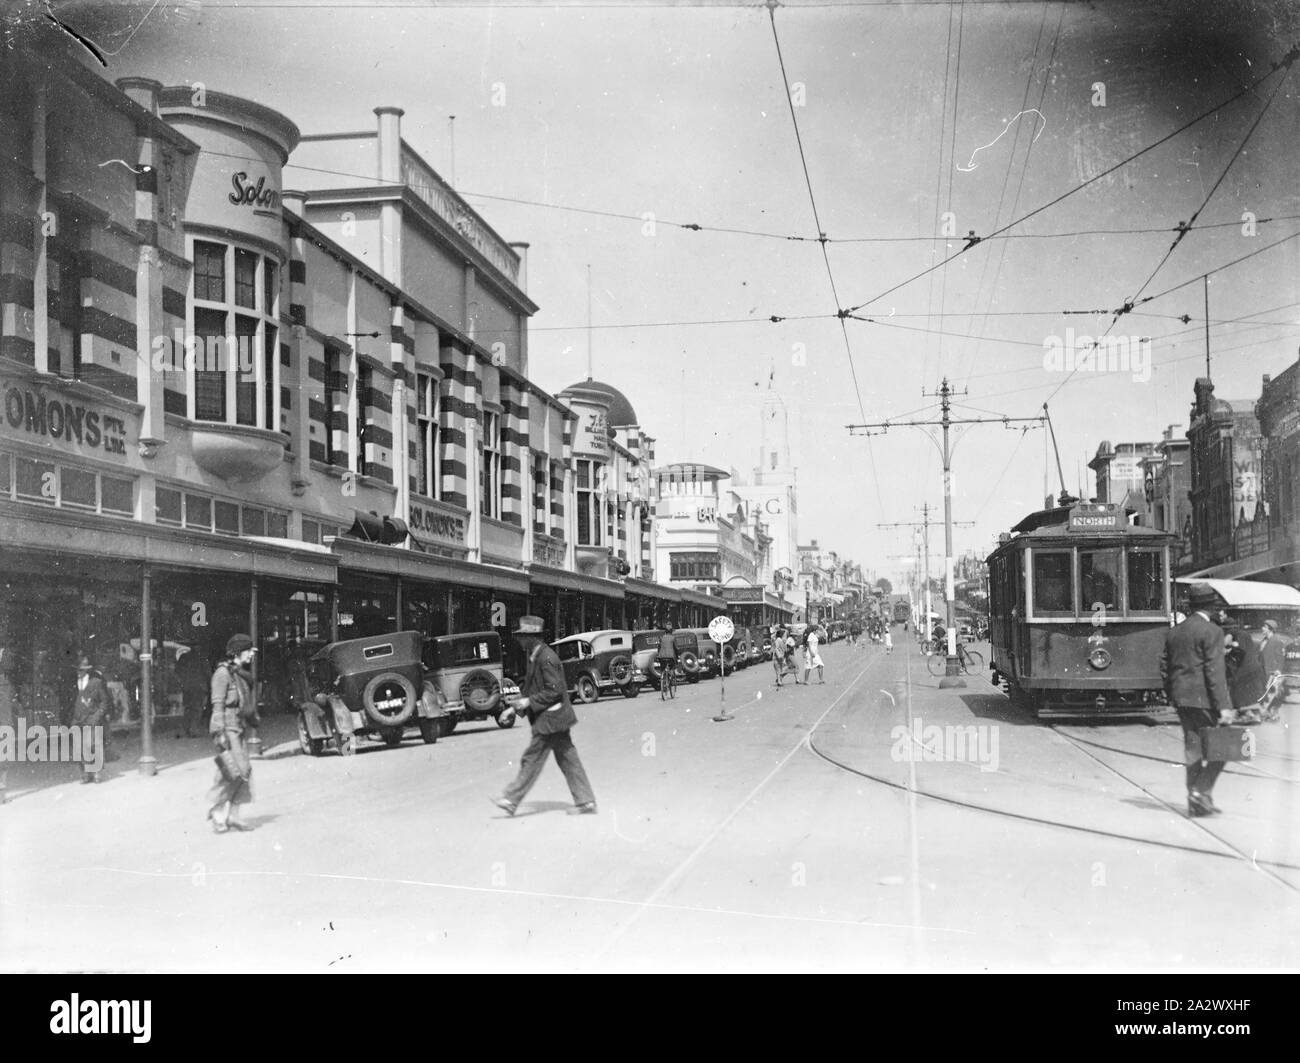 Negative - Moorabool Street, Geelong, Victoria, circa 1935, Black and white negative of Moorabool Street, viewed from Malop Street, Geelong, circa 1935. The streetscape shows pedestrians, trams and motor cars. The cars are parked along the street in front of Solomon's Building, a popular shopping emporium. Originally built in 1912-1913, in the mid 1980s Solomon's Building became part of the Market Square shopping development, with only the facade Stock Photo